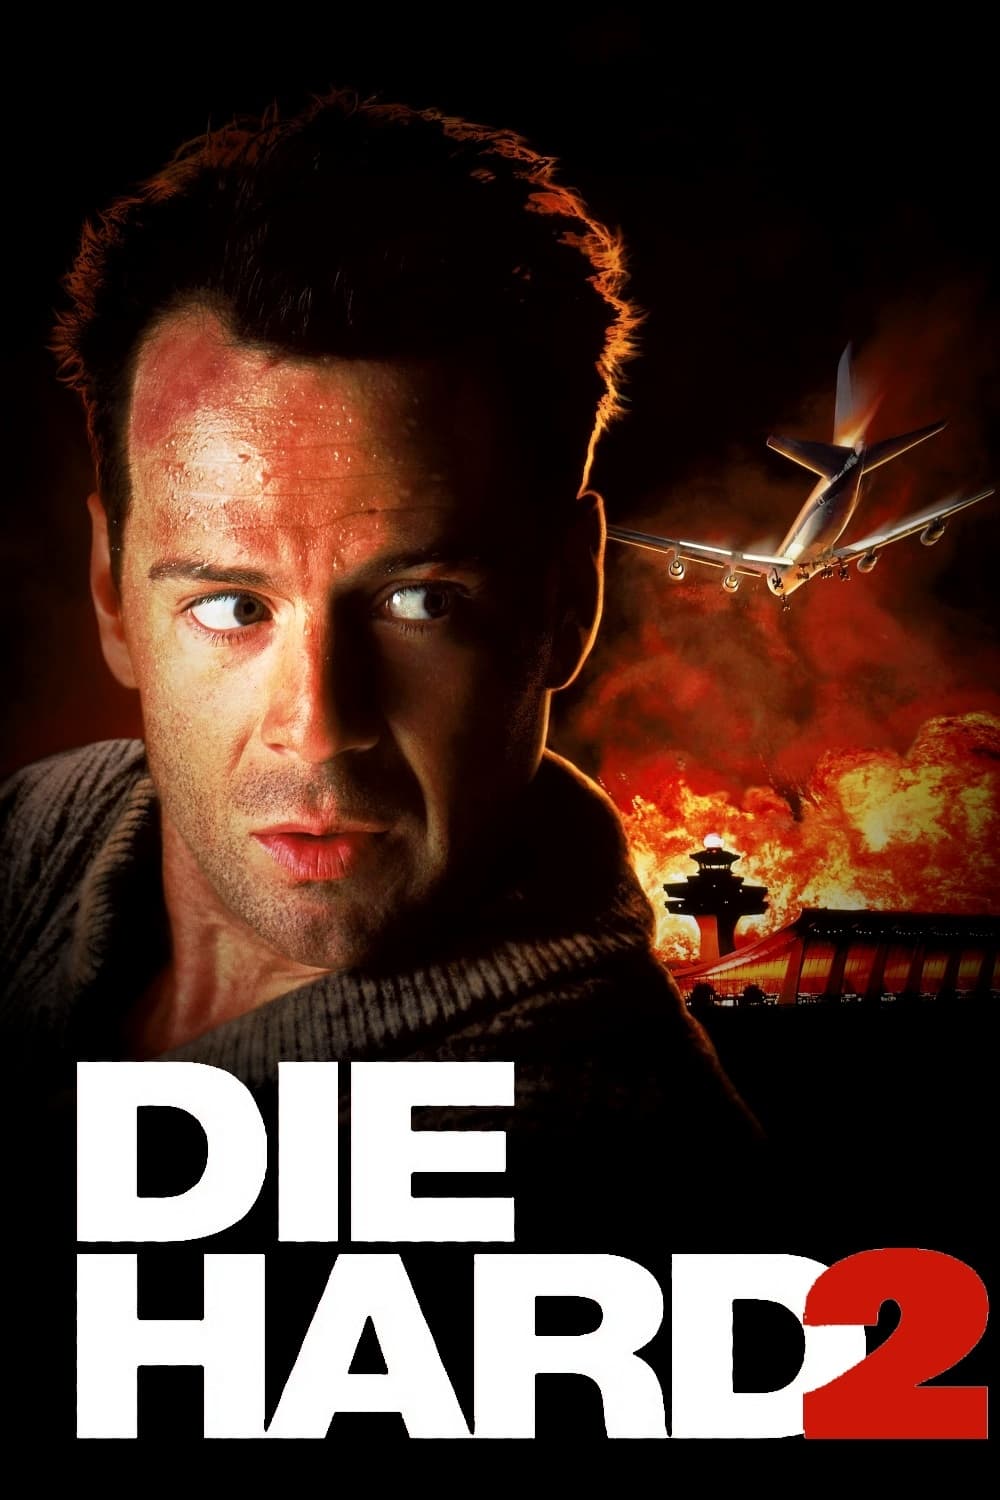 Poster for the movie "Die Hard 2"